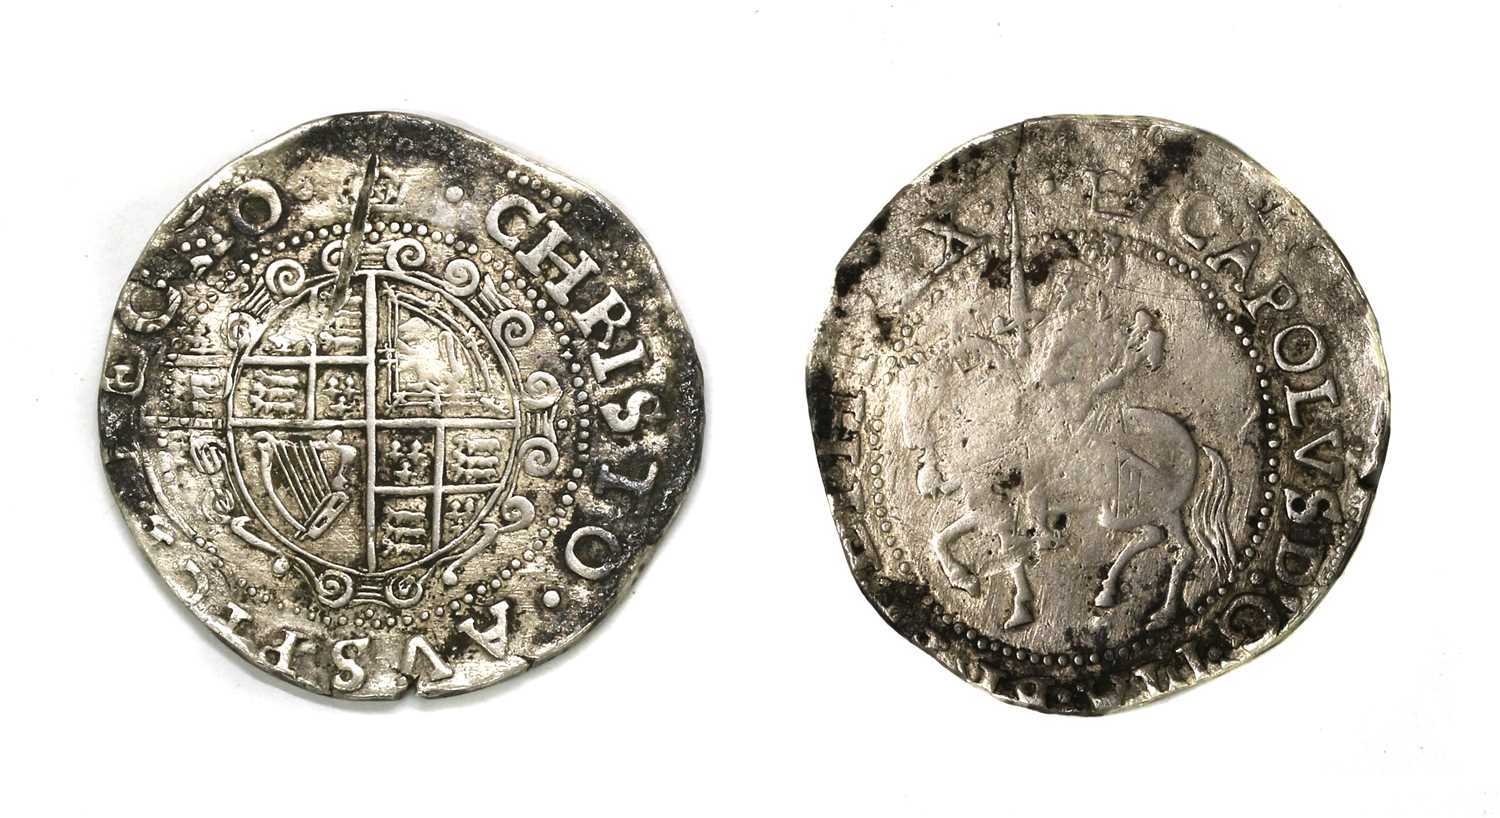 Lot 2 - Coins, Great Britain, Charles I (1625-1649)